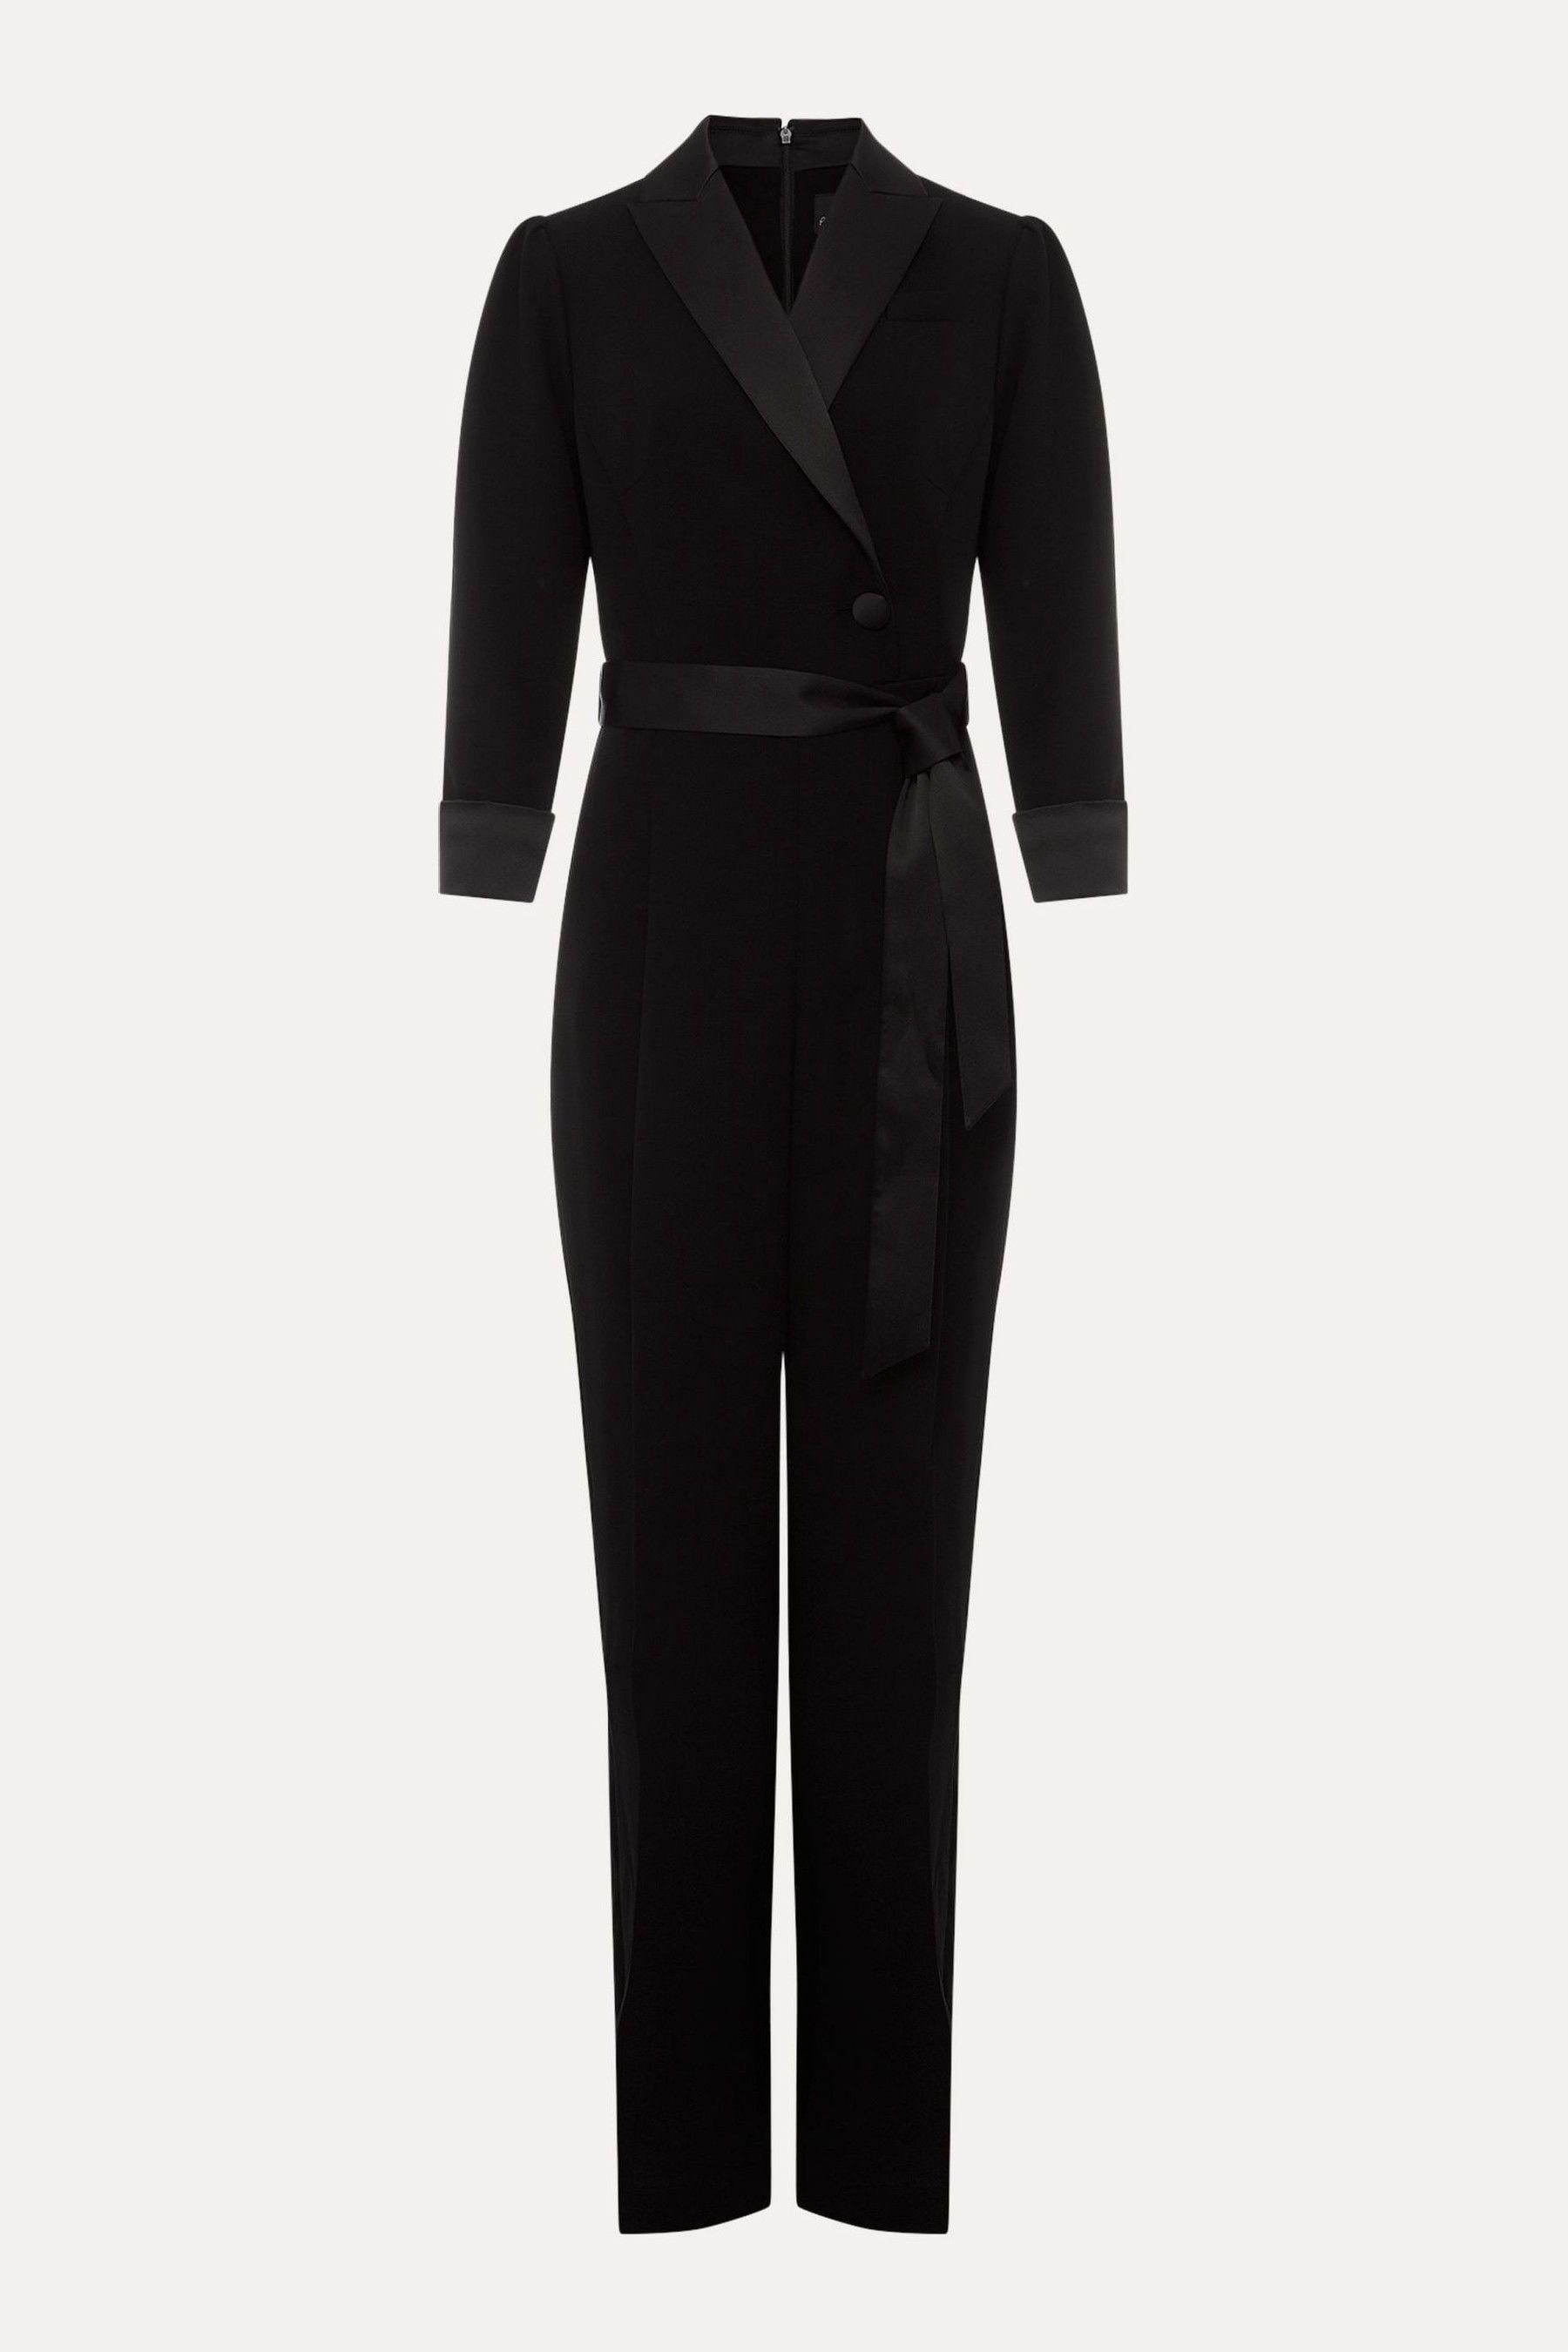 Buy Phase Eight Kylie Tux Black Jumpsuit from the Next UK online shop